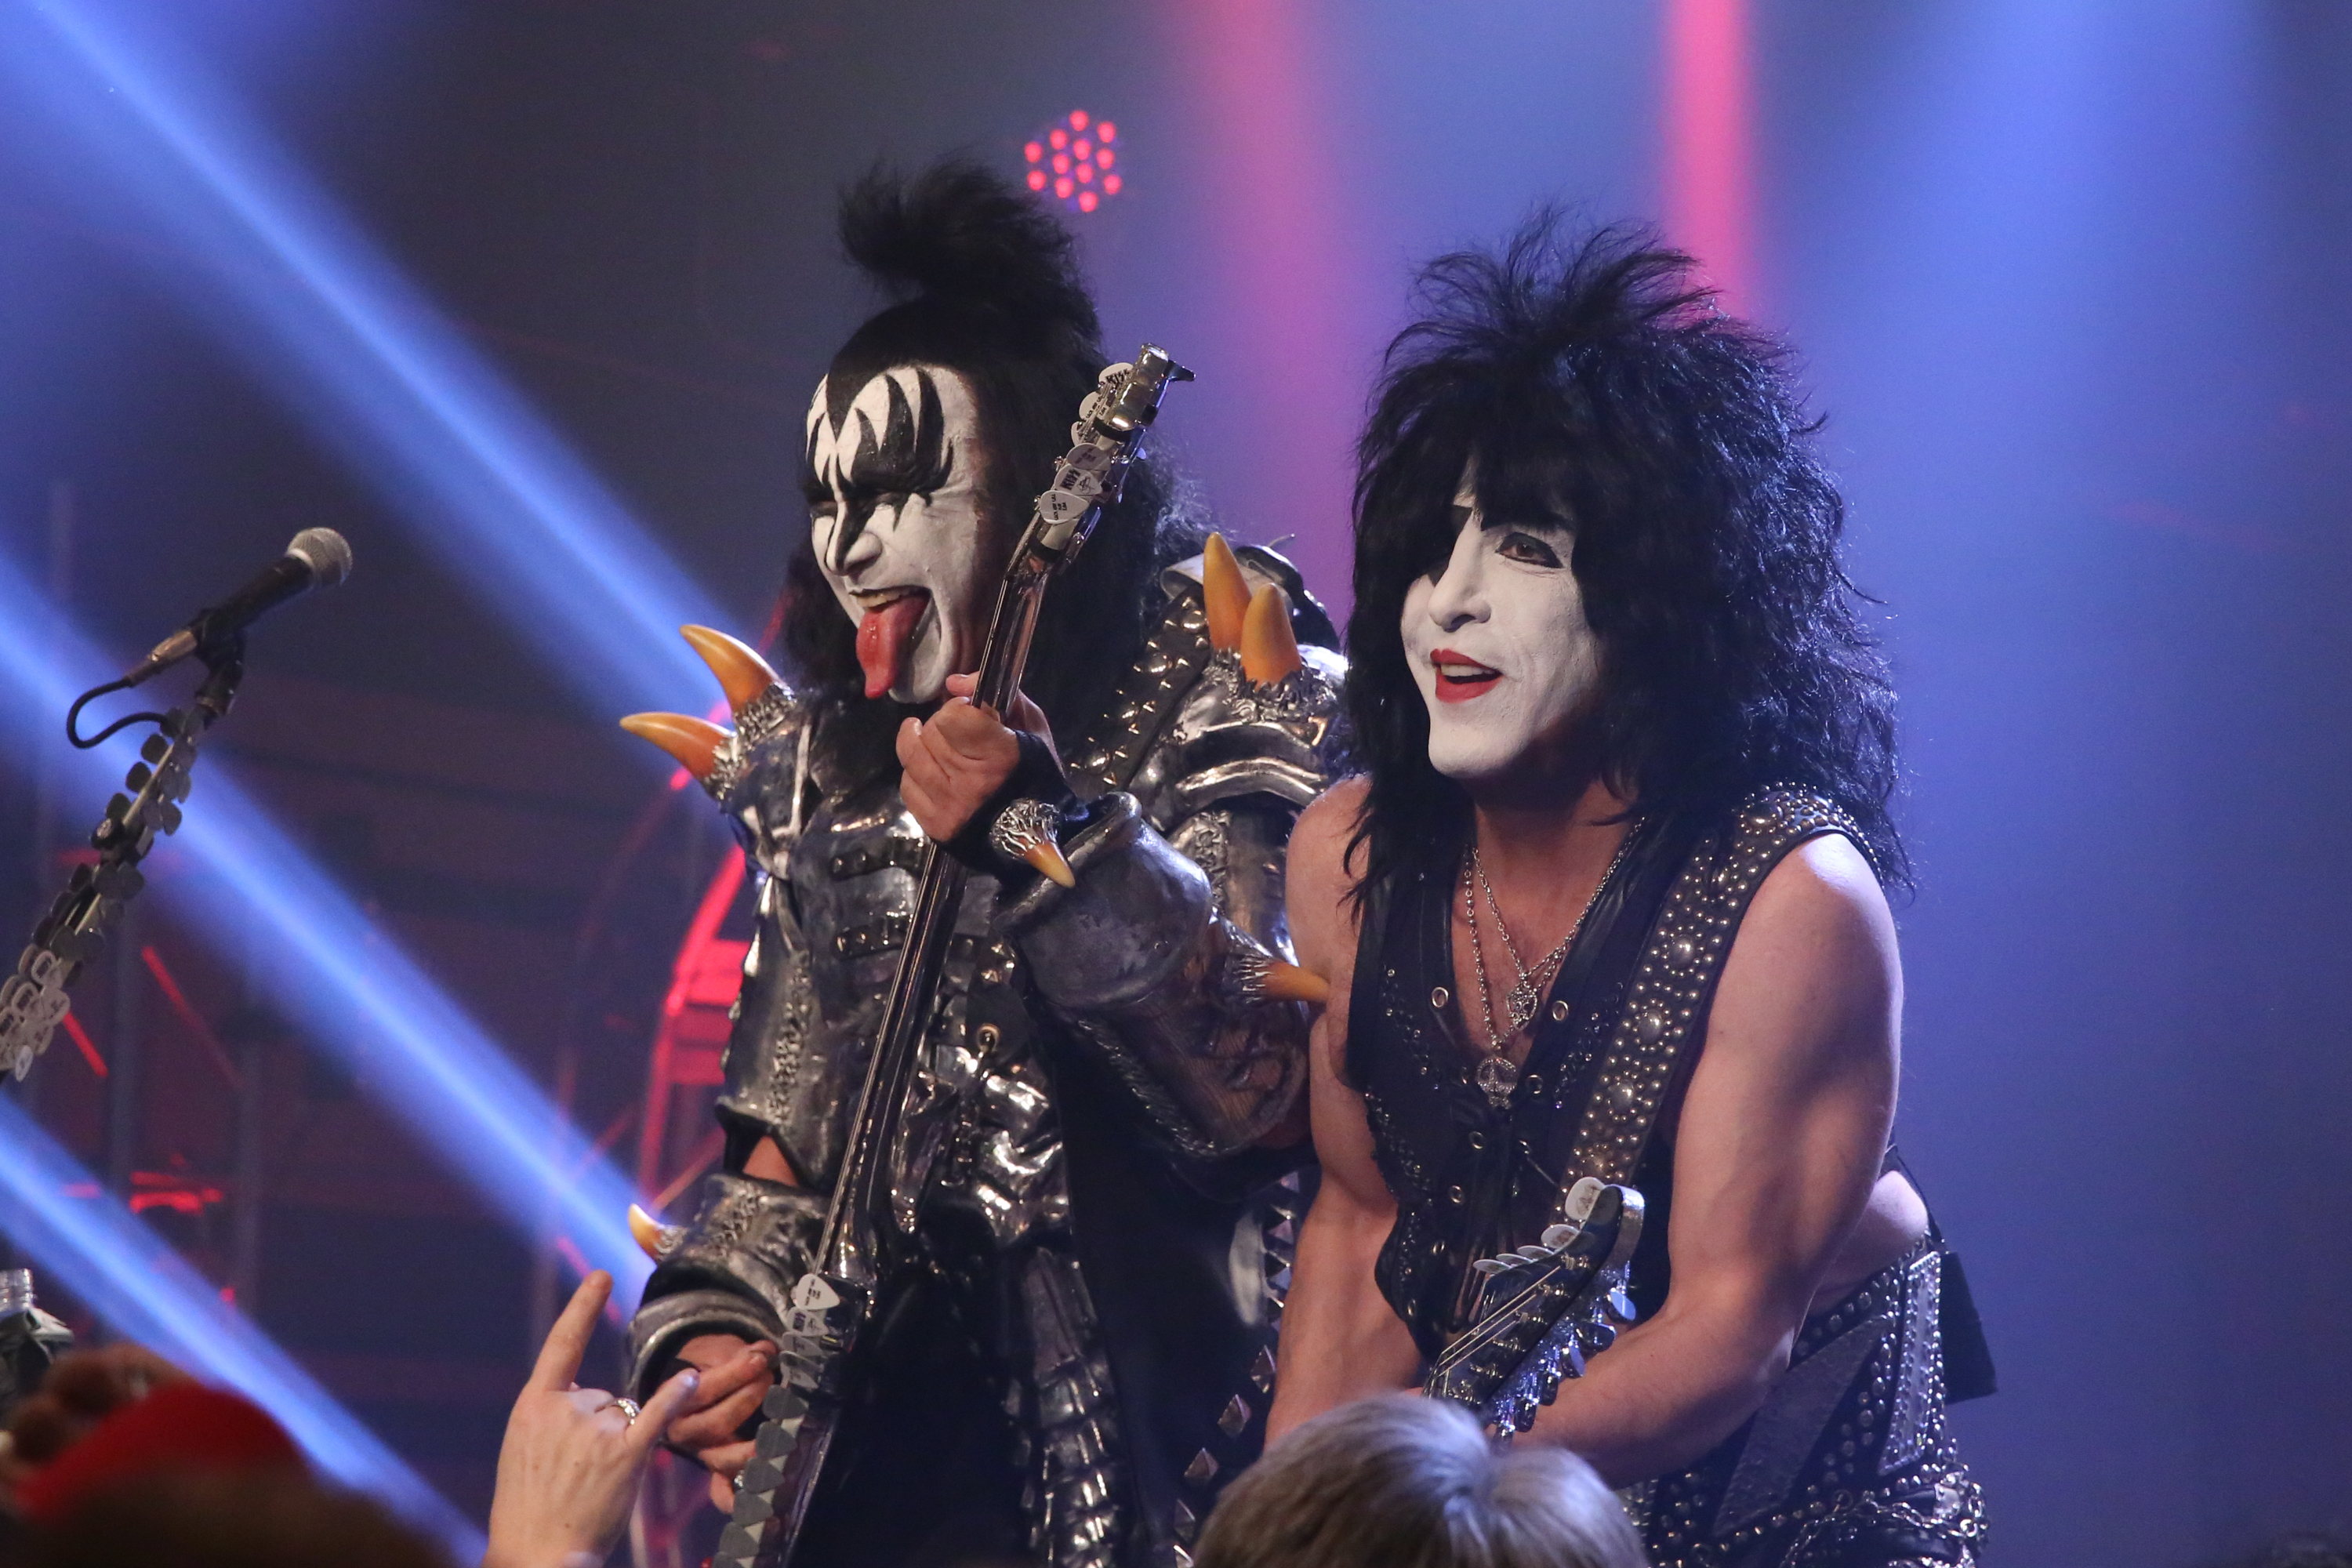 From left: Gene Simmons and Paul Stanley of Kiss perform on The Tonight Show Starring Jimmy Fallon on April 11, 2014. (Nathaniel Chadwick—NBC/Getty Images)